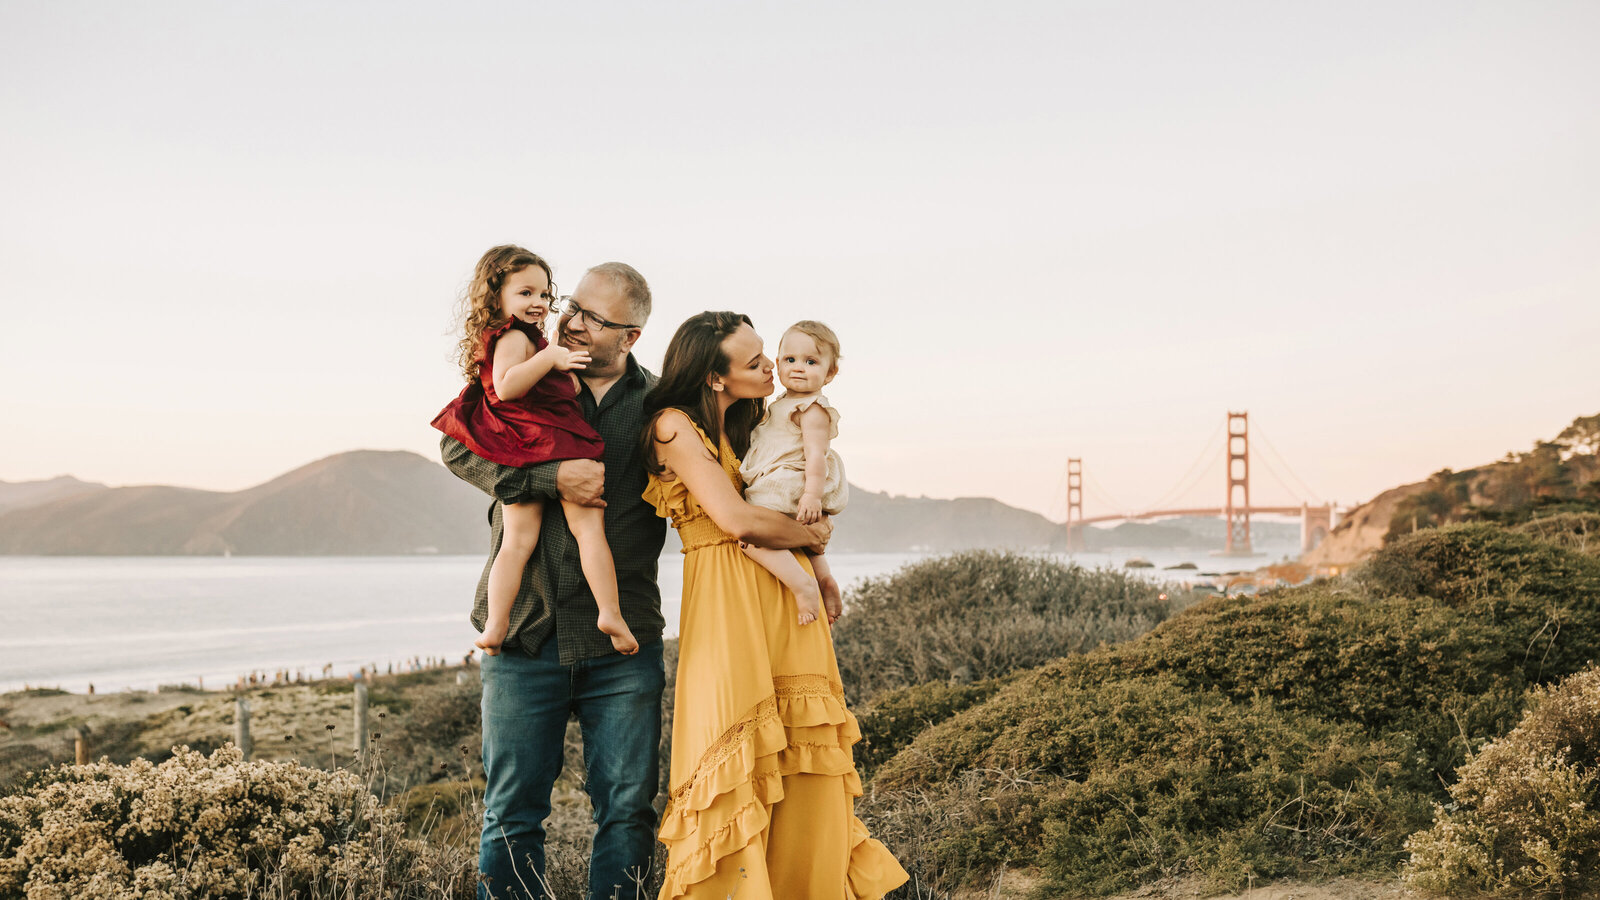 family lifestyle picture at golden gate bridge